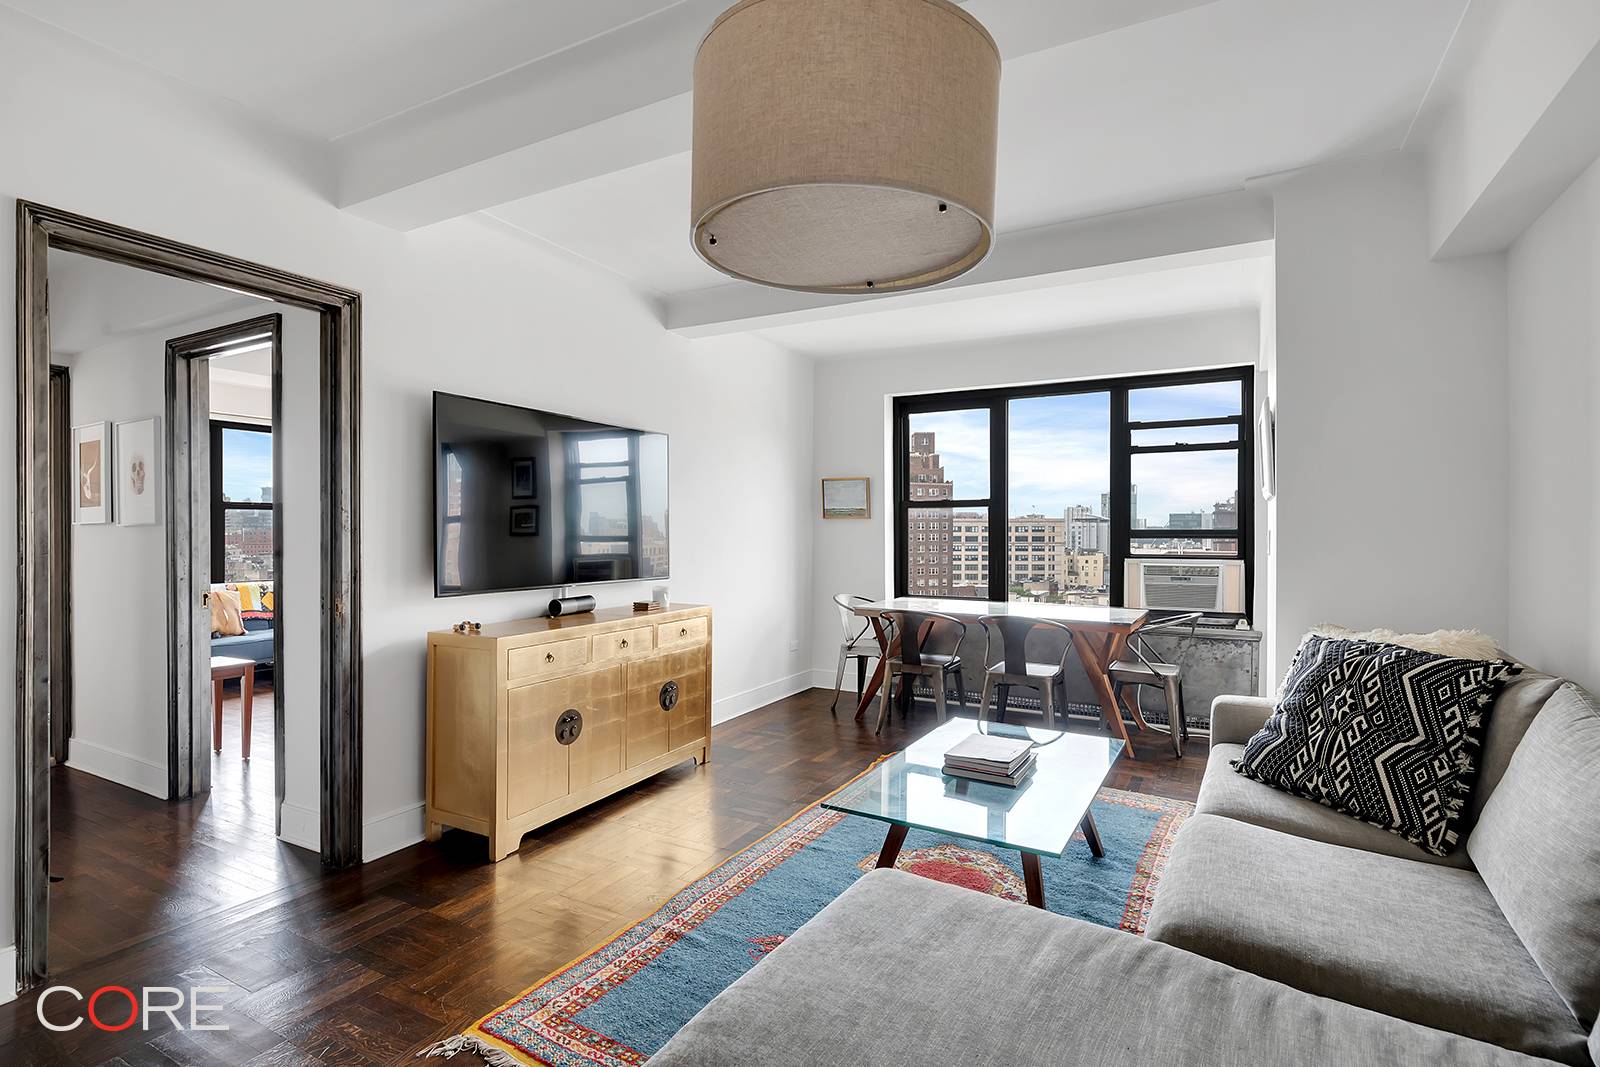 Available furnished for a short term lease through March 2021, this spacious and bright one bedroom, one bathroom home is perched on the 12th floor of 56 7th Avenue.